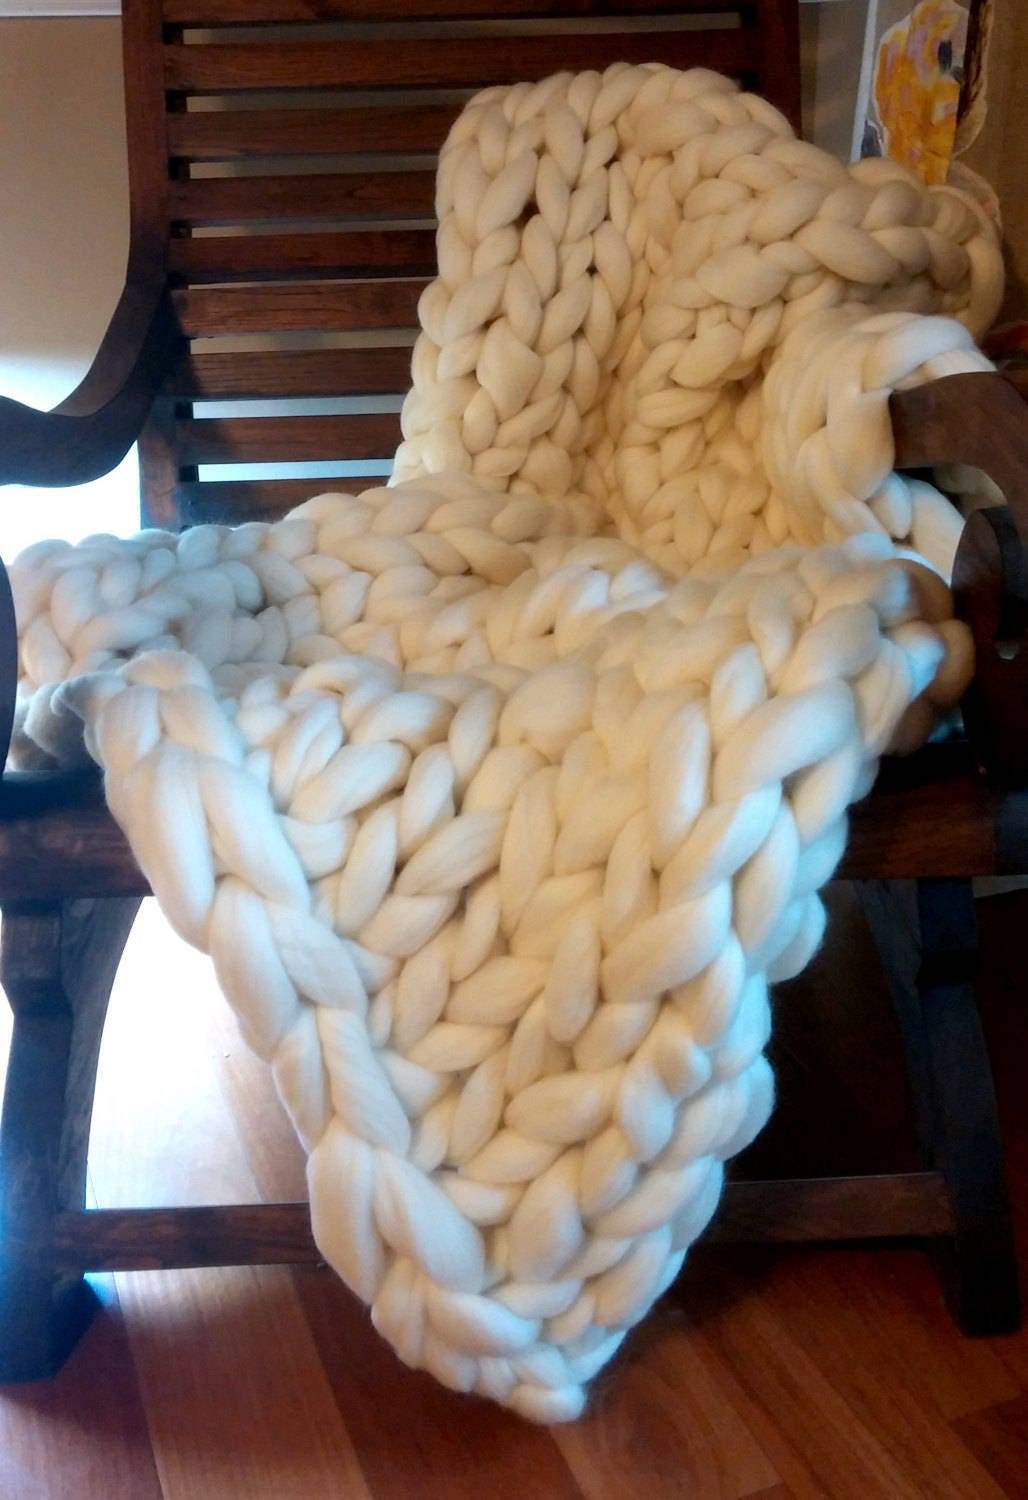 LUXURY Chunky Knit Blanket -Super Chunky Knit Merino Wool 40" x 60" Throw Blanket Giant Knit, Bulky Knit Blanket, House Staging, Modeling